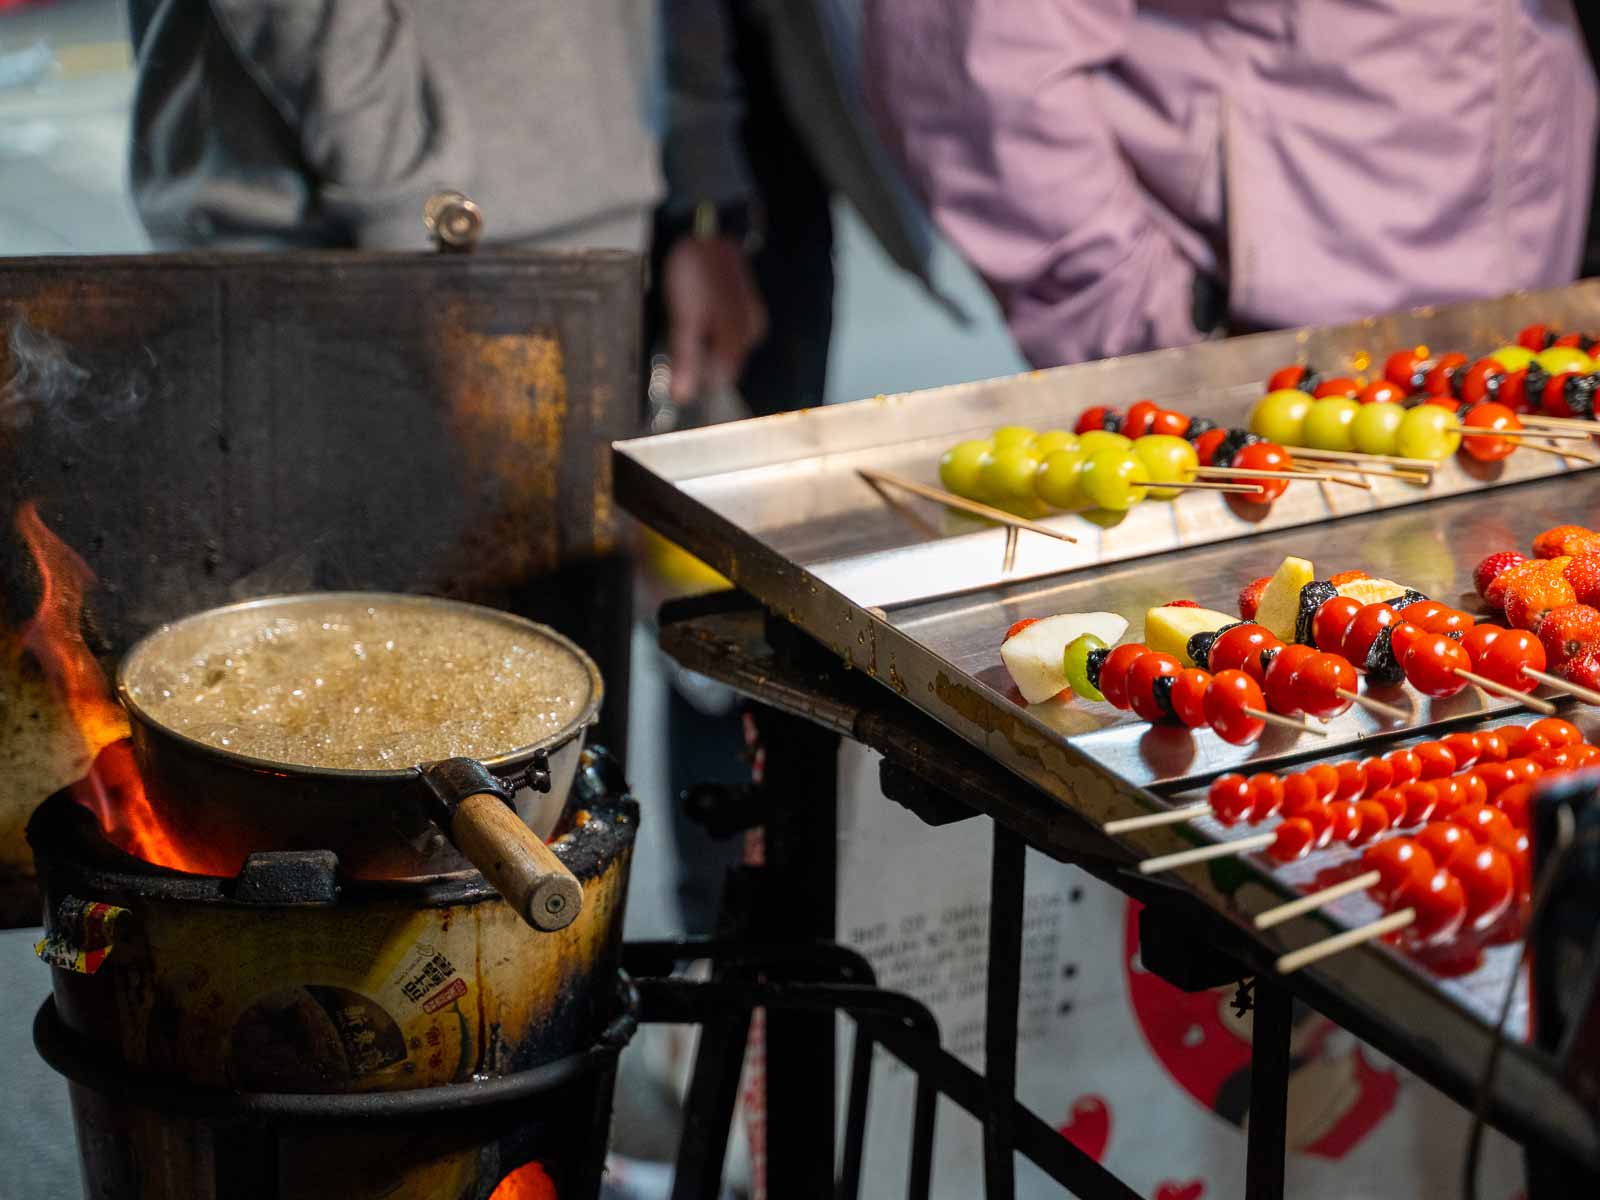 A boiling bowl of sugar-syrup sits next to fruit skewers.